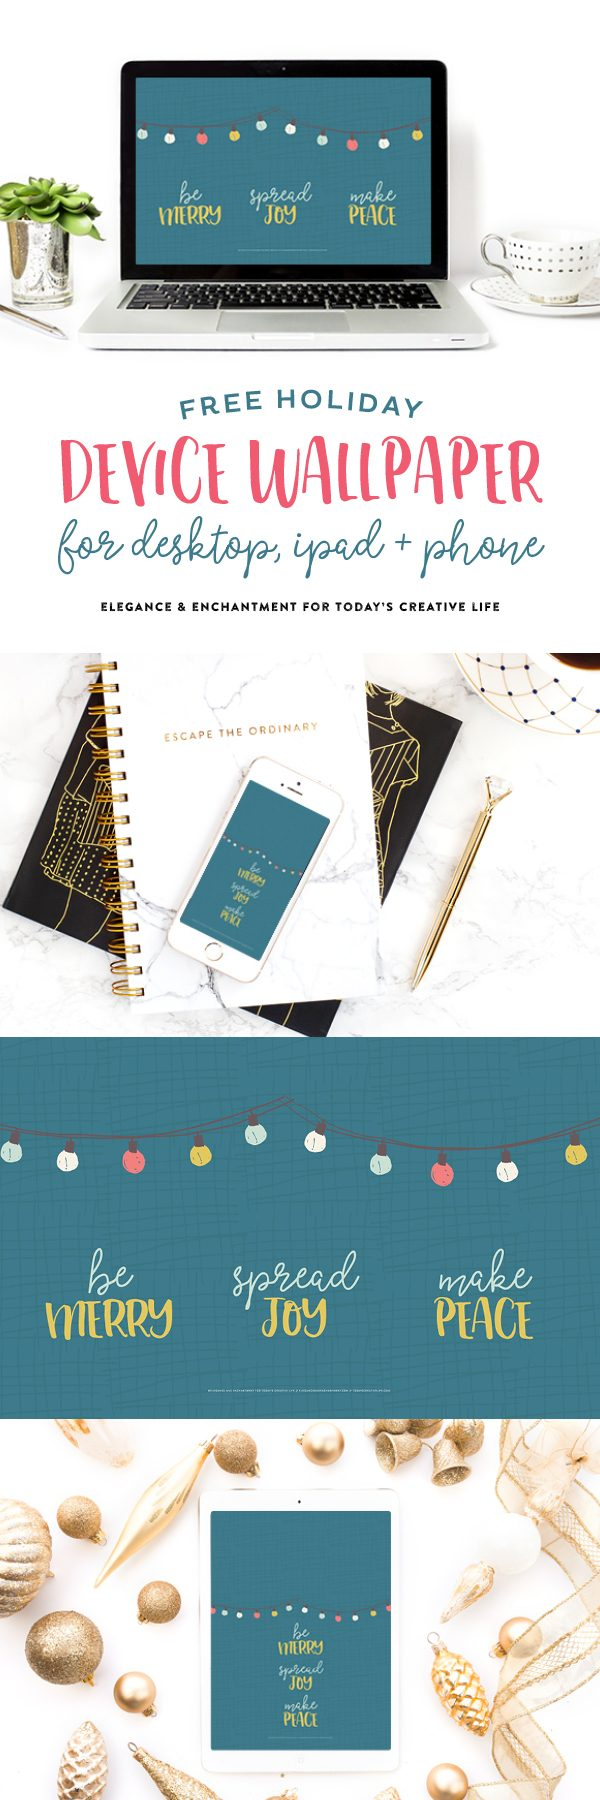 Organized For The Year! | Today&#039;s Creative Life for Elegance And Enchantment